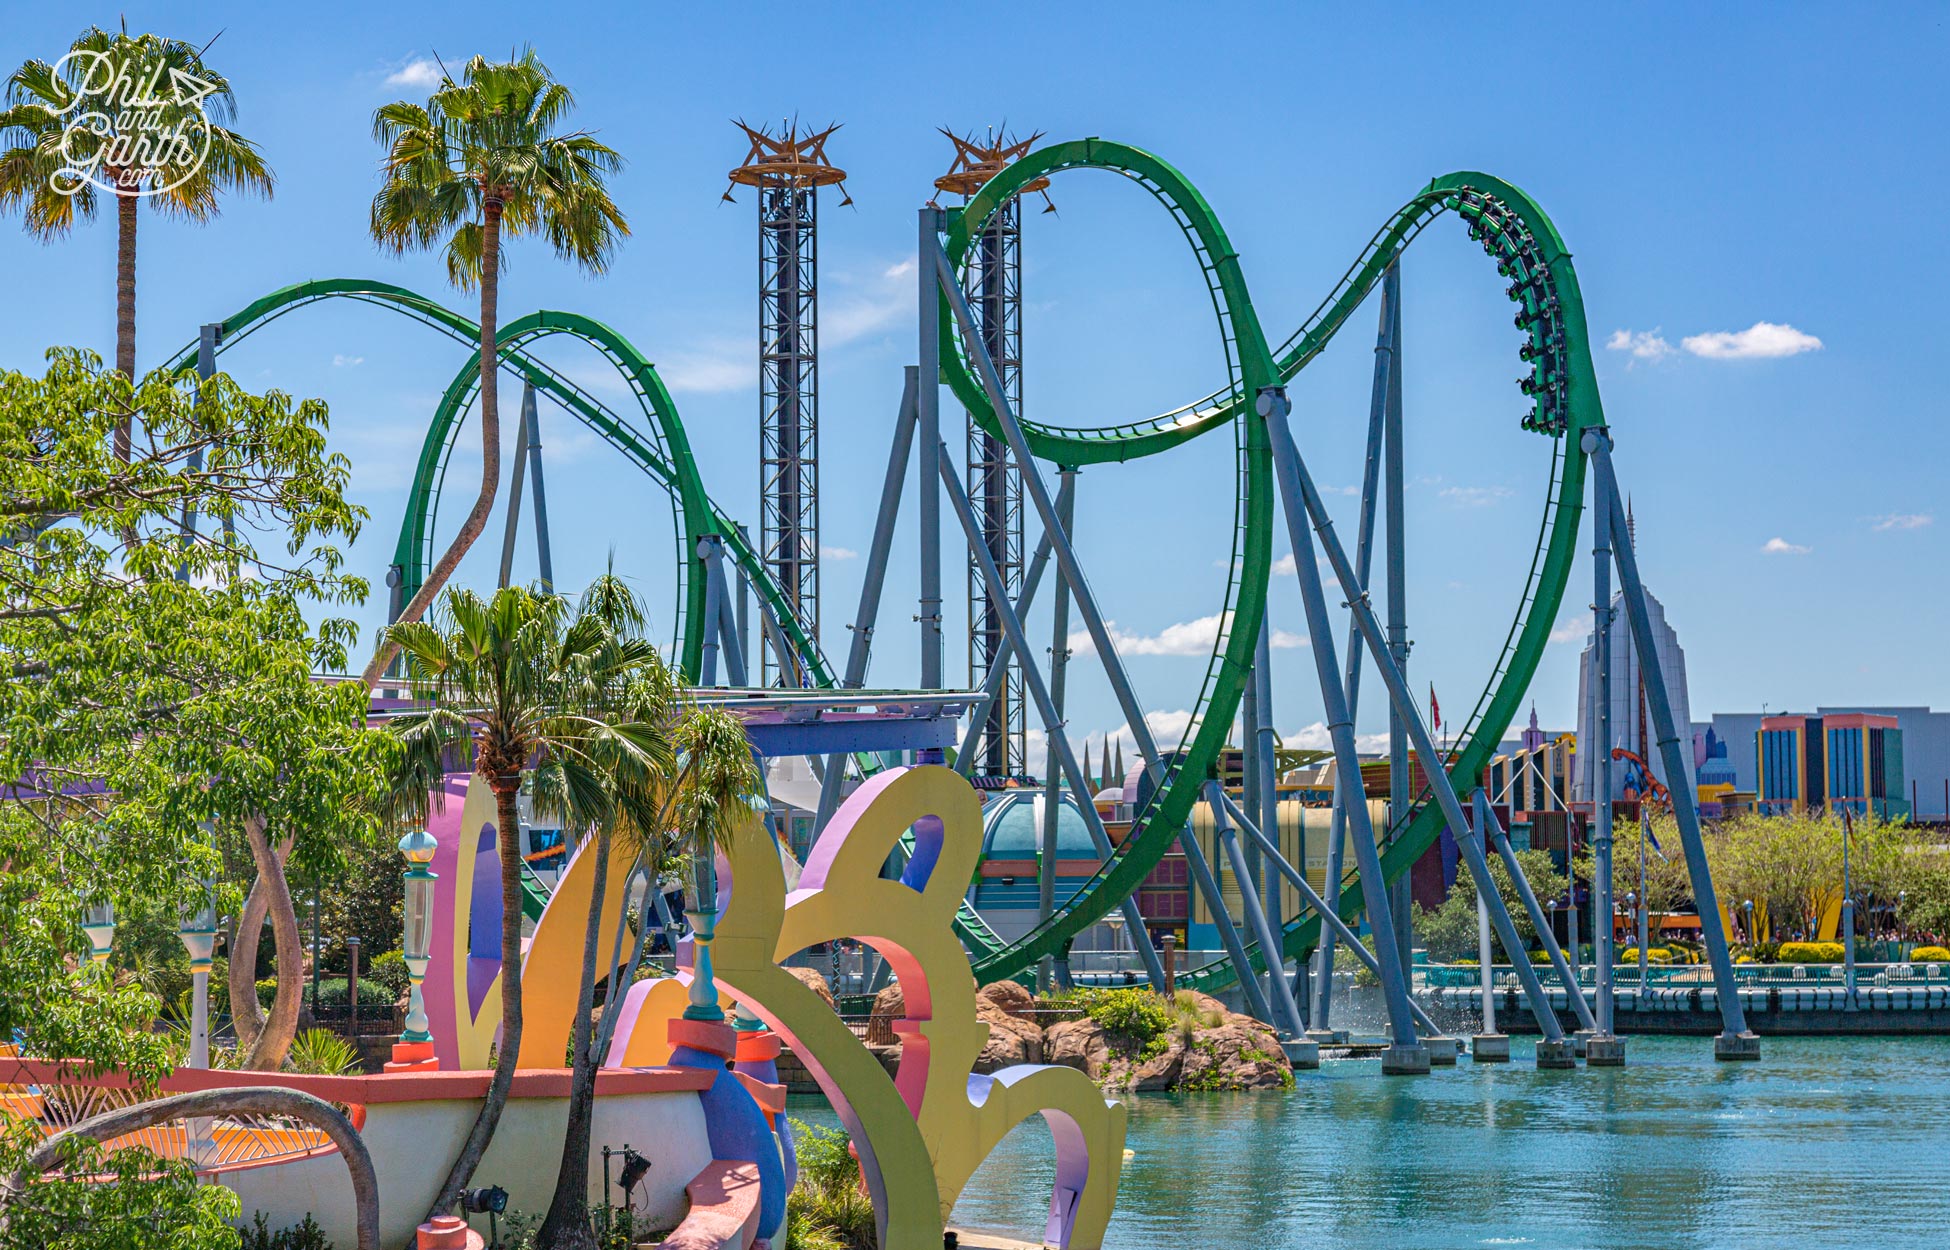 Look at the size of the Hulk coaster